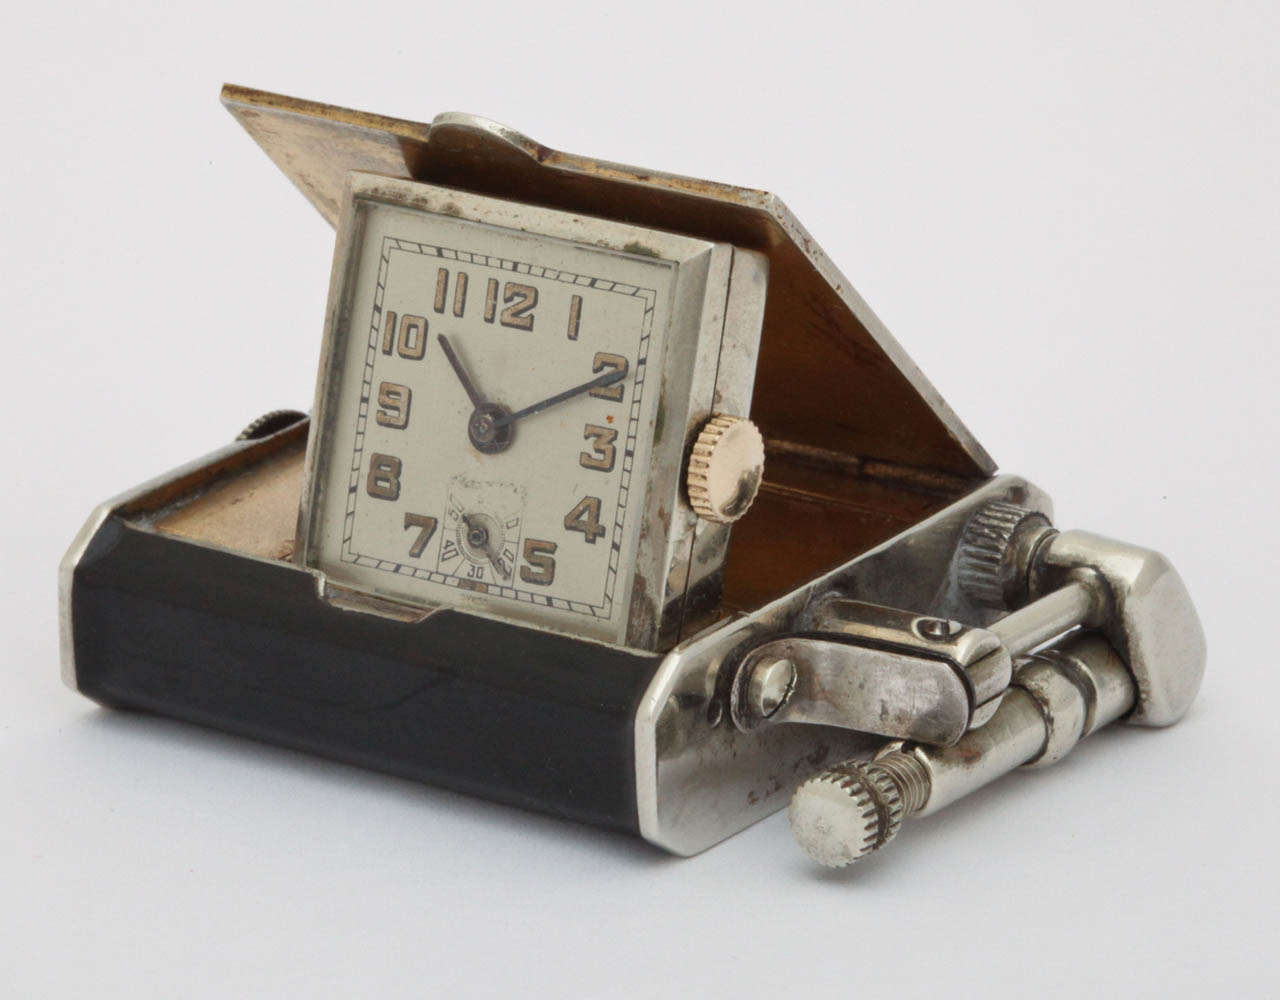 Hermann lighter with concealed watch. Square case is concealed in an enamel gold case with lift arm lighter. Watch in the center of the case concealed by a hinged door, Brevet 138381, 53mm x 40mm x 11mm.

Made in Switzerland by Hermann & Co., La